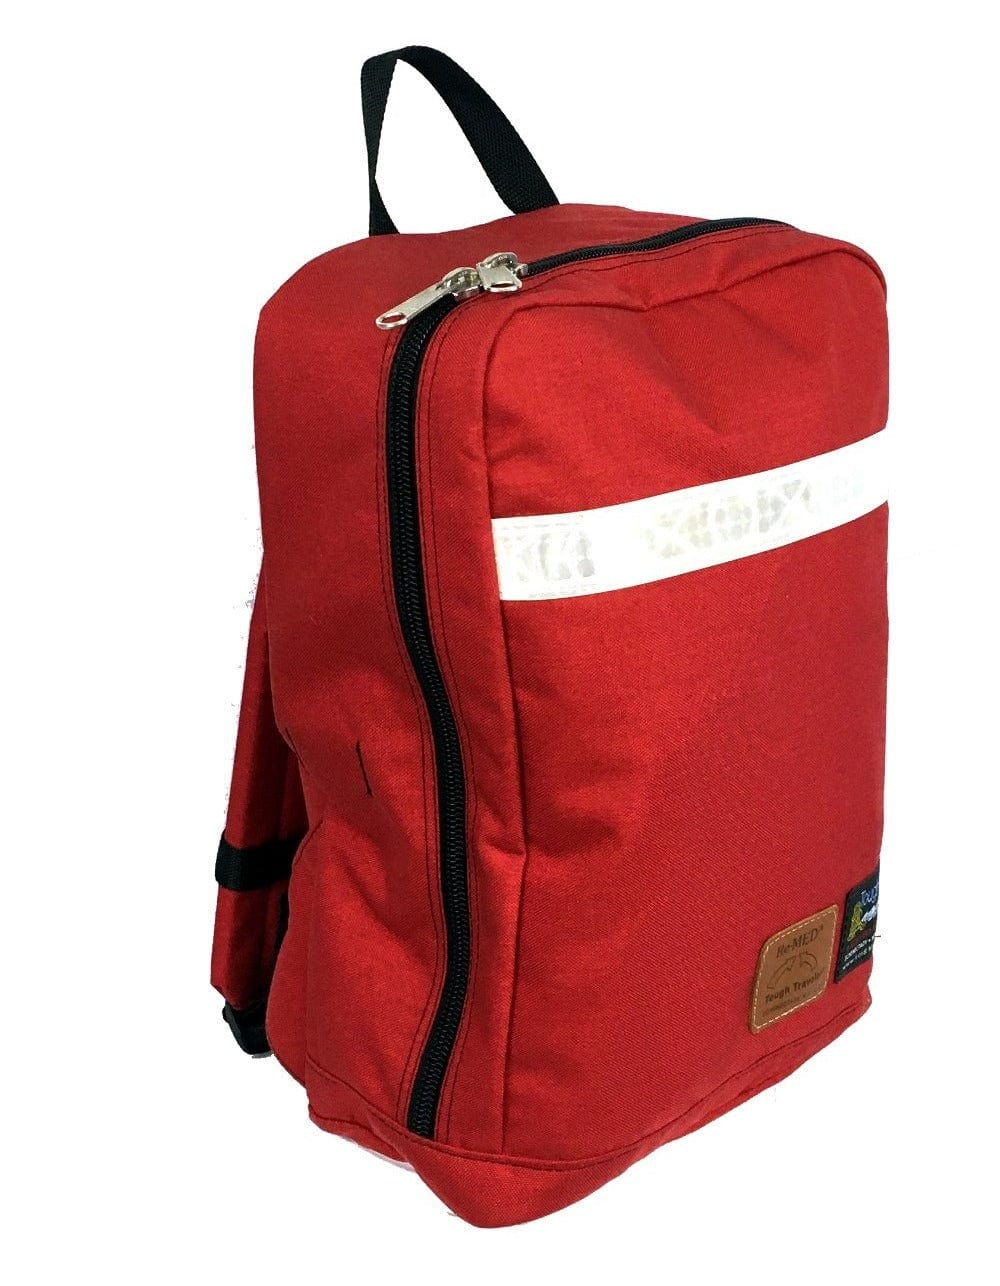 FDB First Responder Backpacks, by Tough Traveler. Made in USA since 1970